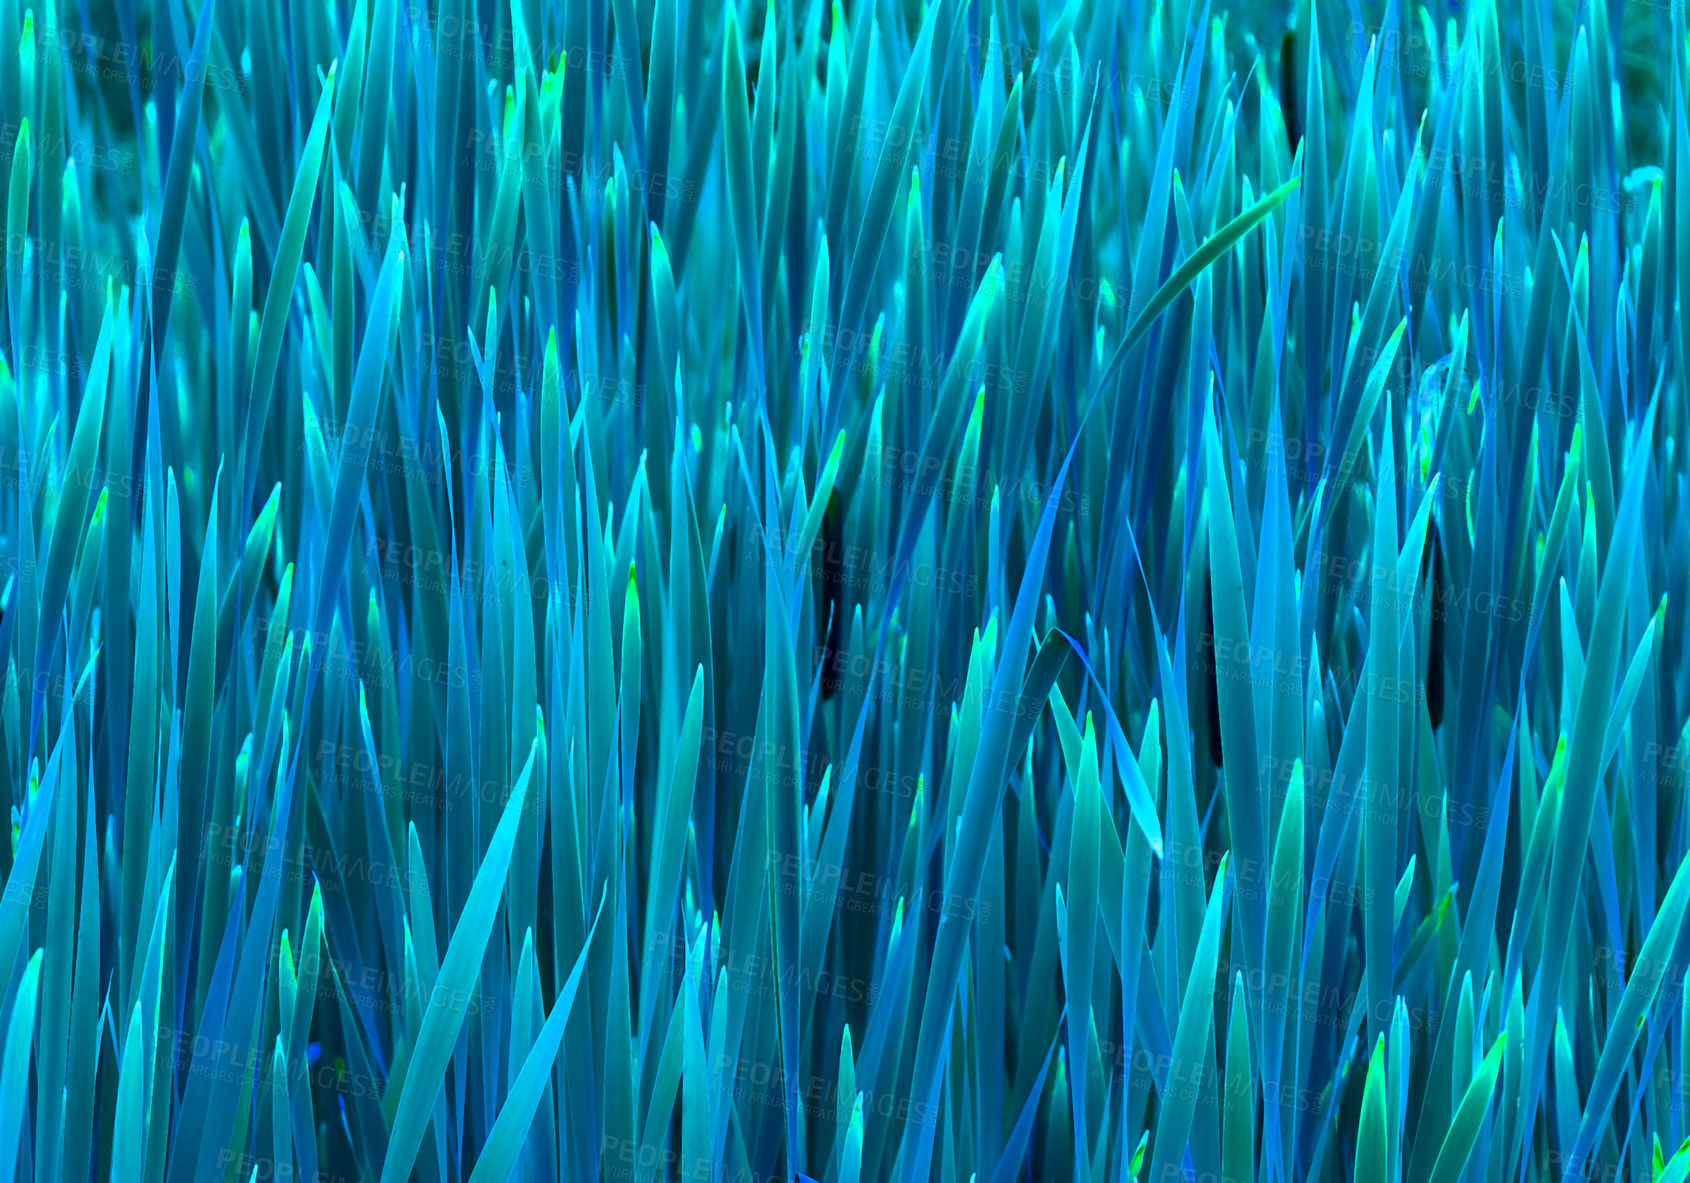 Buy stock photo Closeup of bluegrass growing outside in a garden with copy space. Long blue grass in a yard or public park. Green growth in a natural habitat or environment during summer or spring